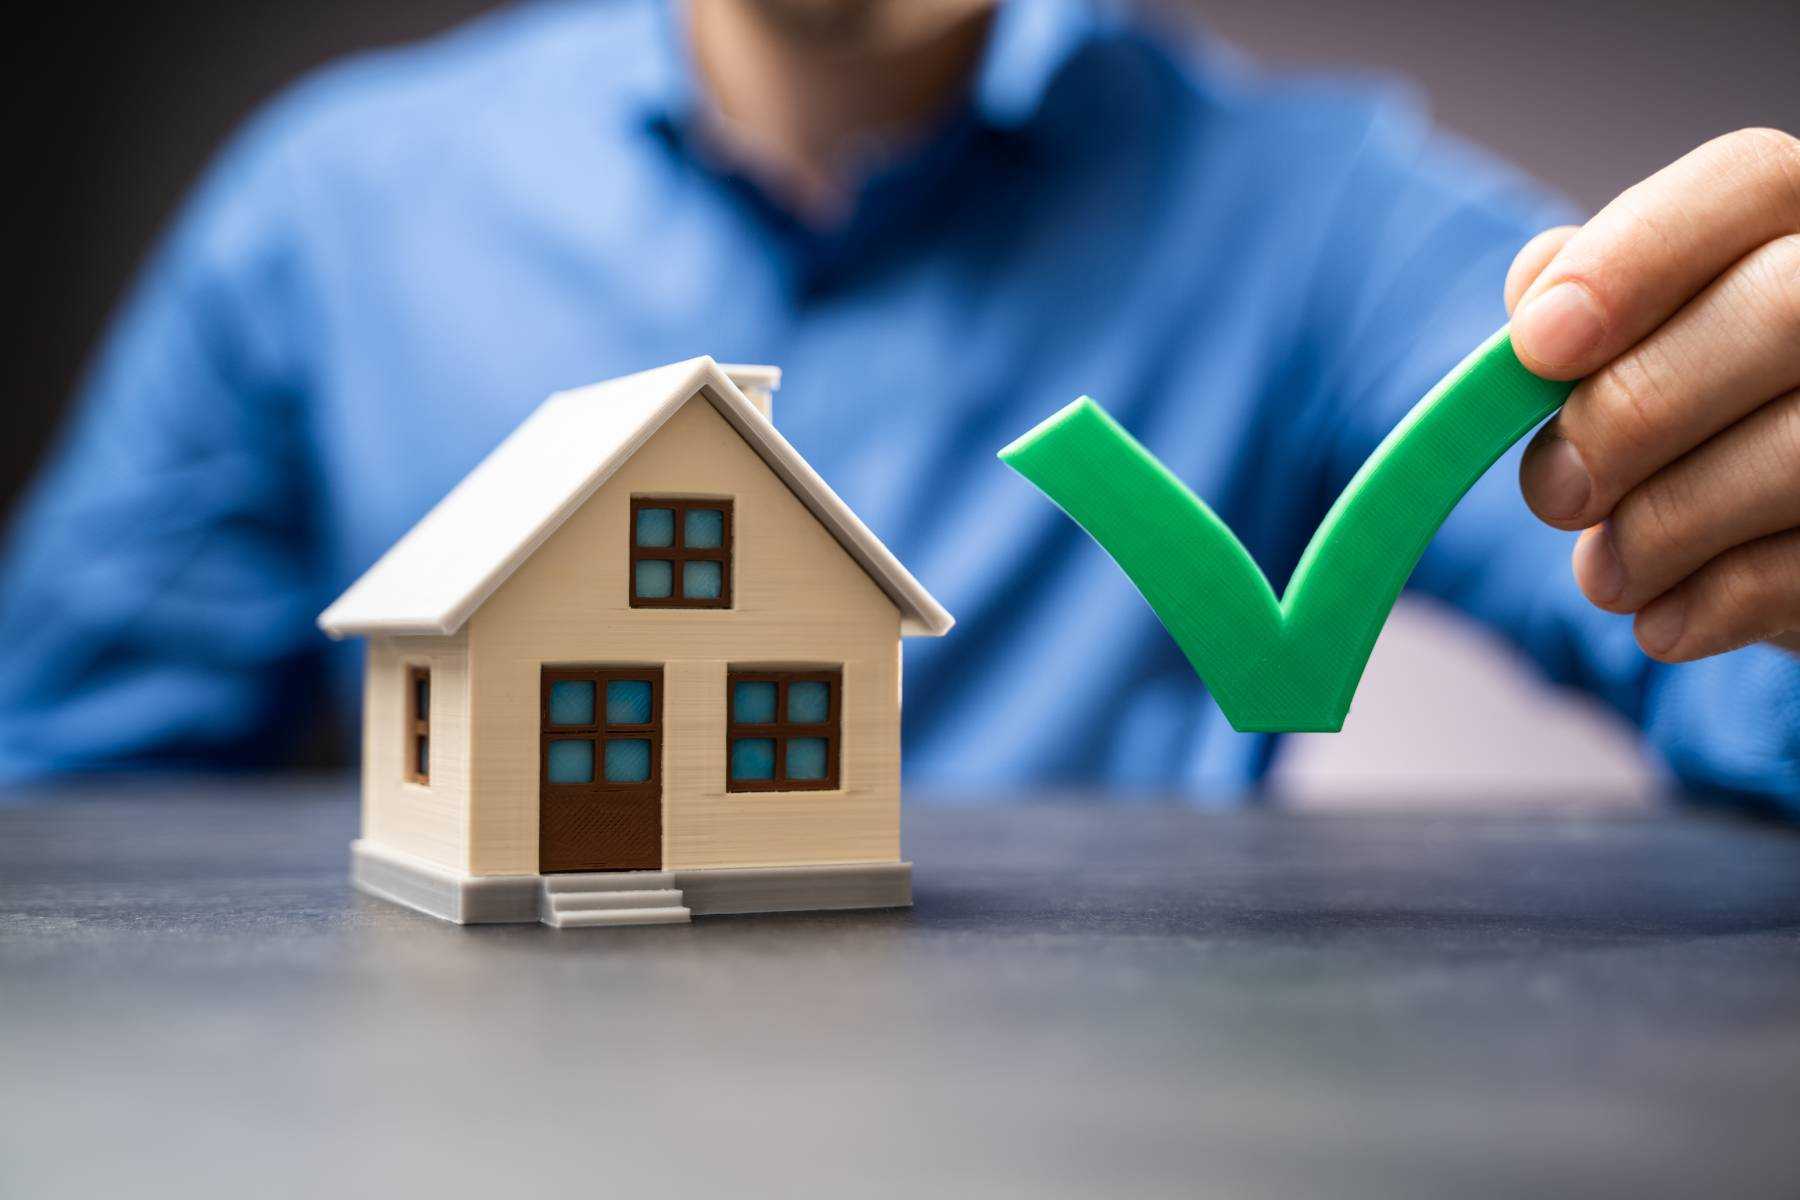 House Selling Checklist: Is Your Home Ready to be Sold?